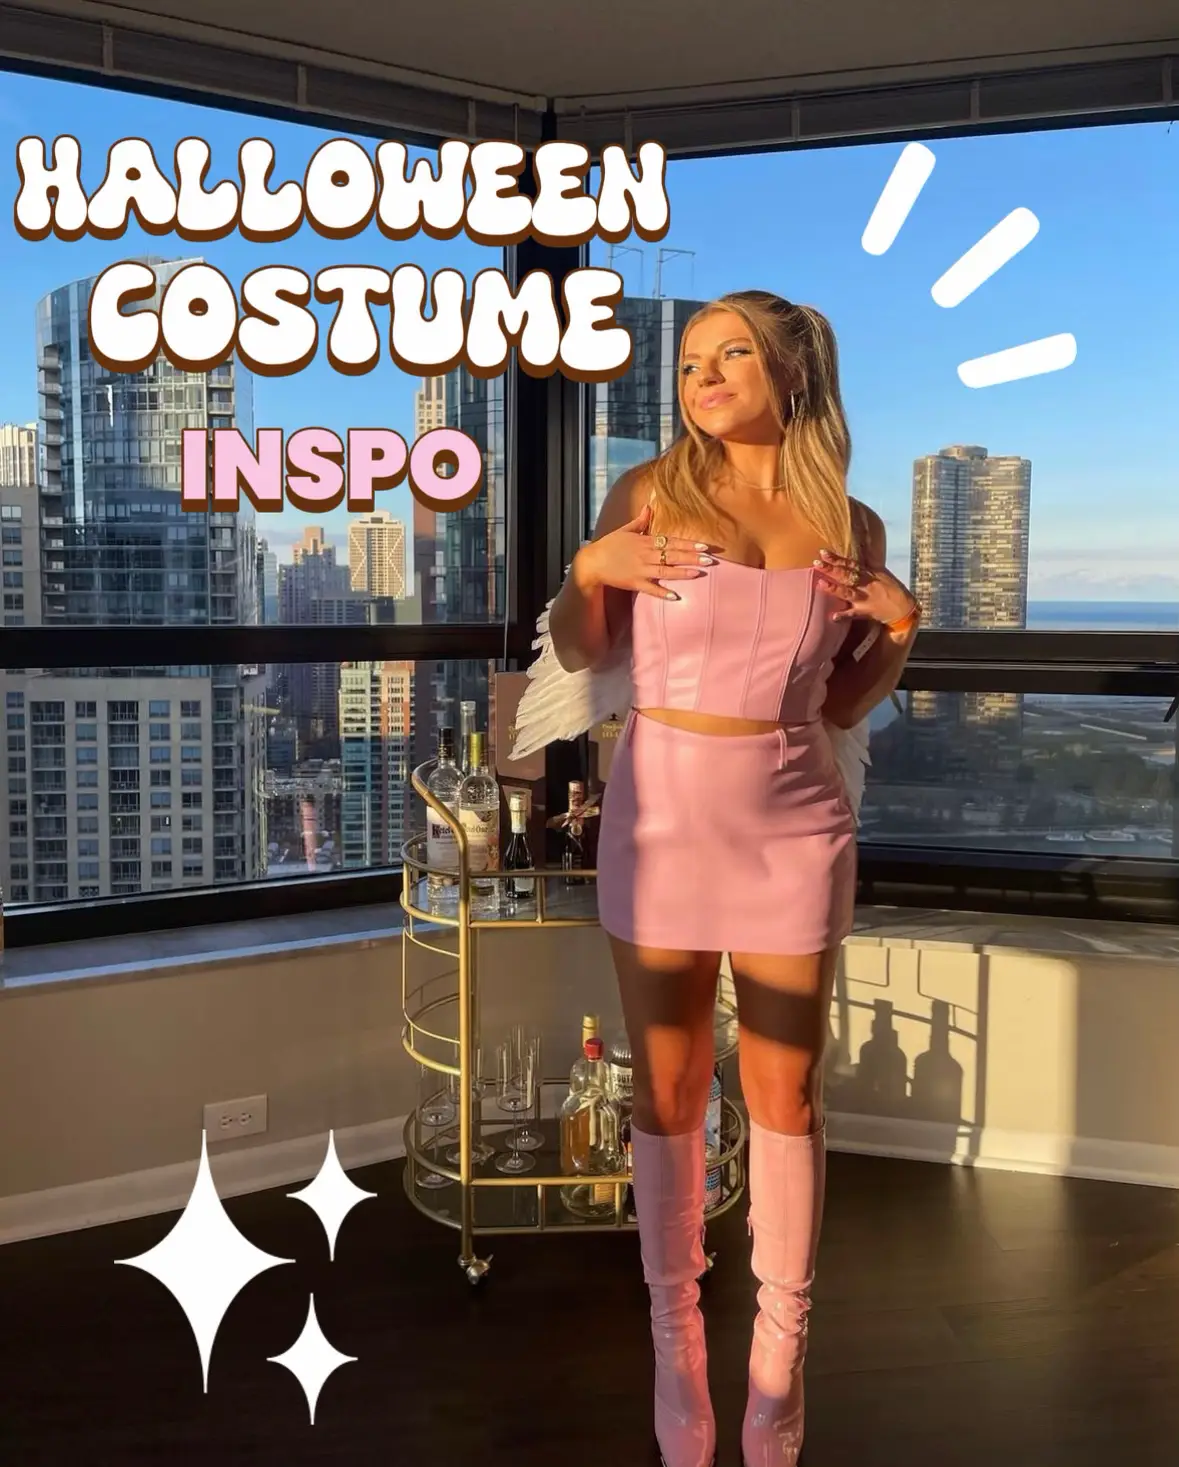 Anyone know where to find this outfit for Halloween? Maddy vibes